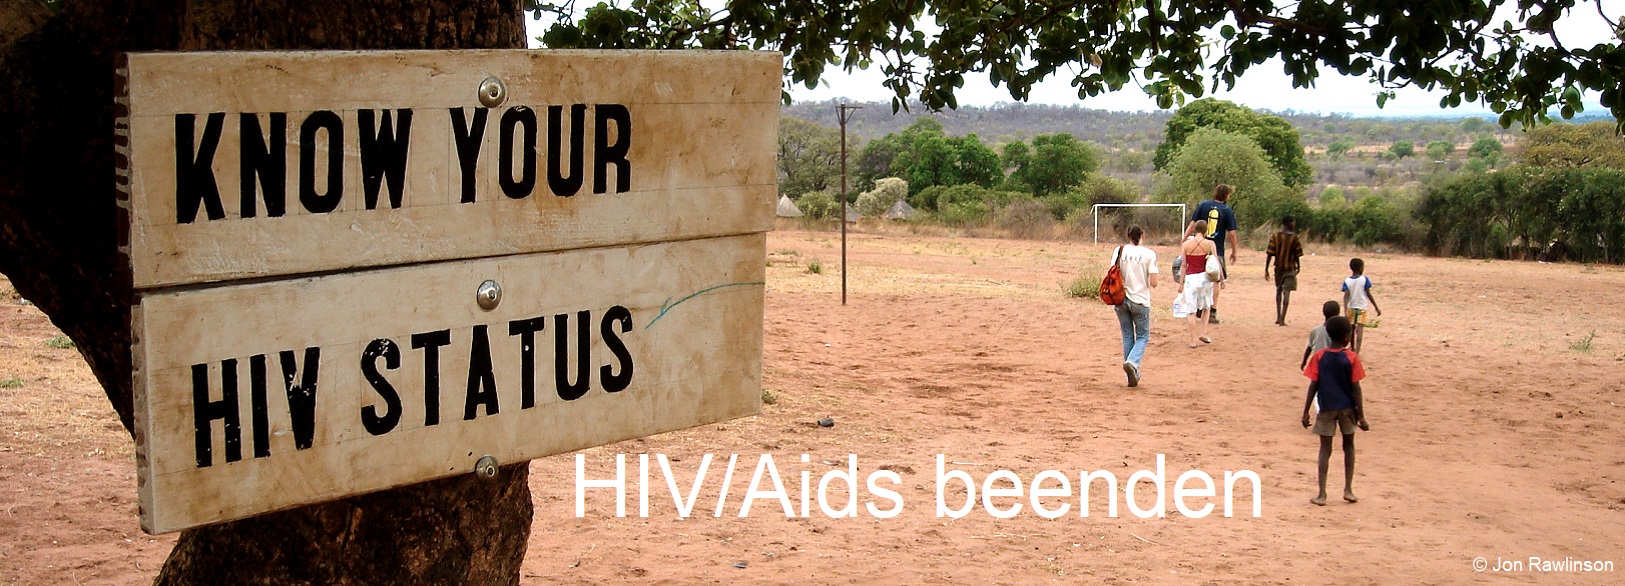 HIV Aids Jonrawlinson Aids is commons in Africa